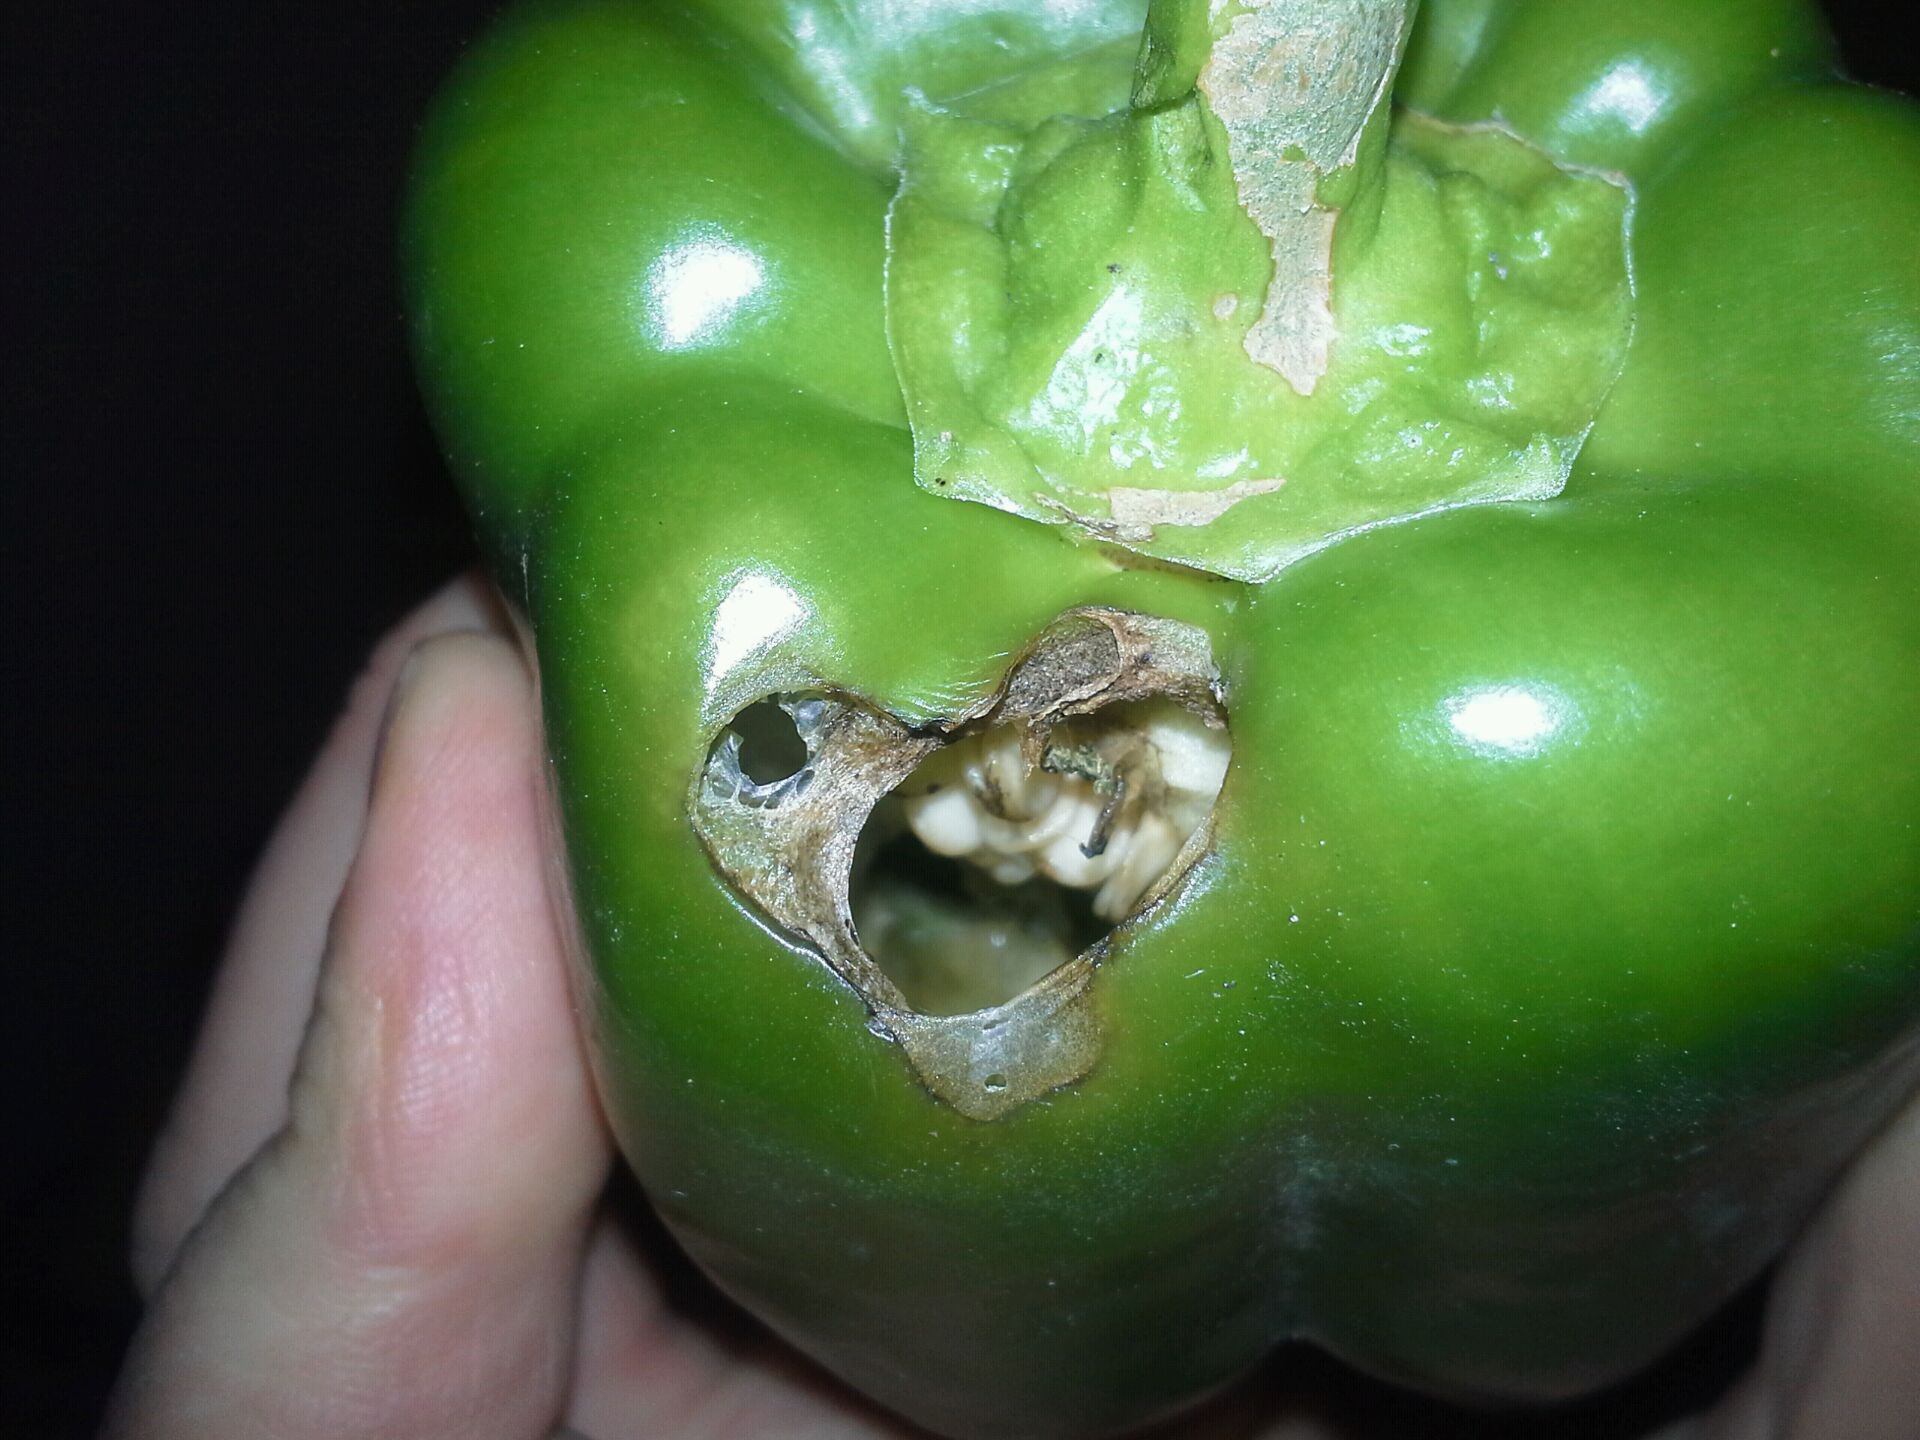 My bell pepper plants are getting holes in some of the peppers and ...